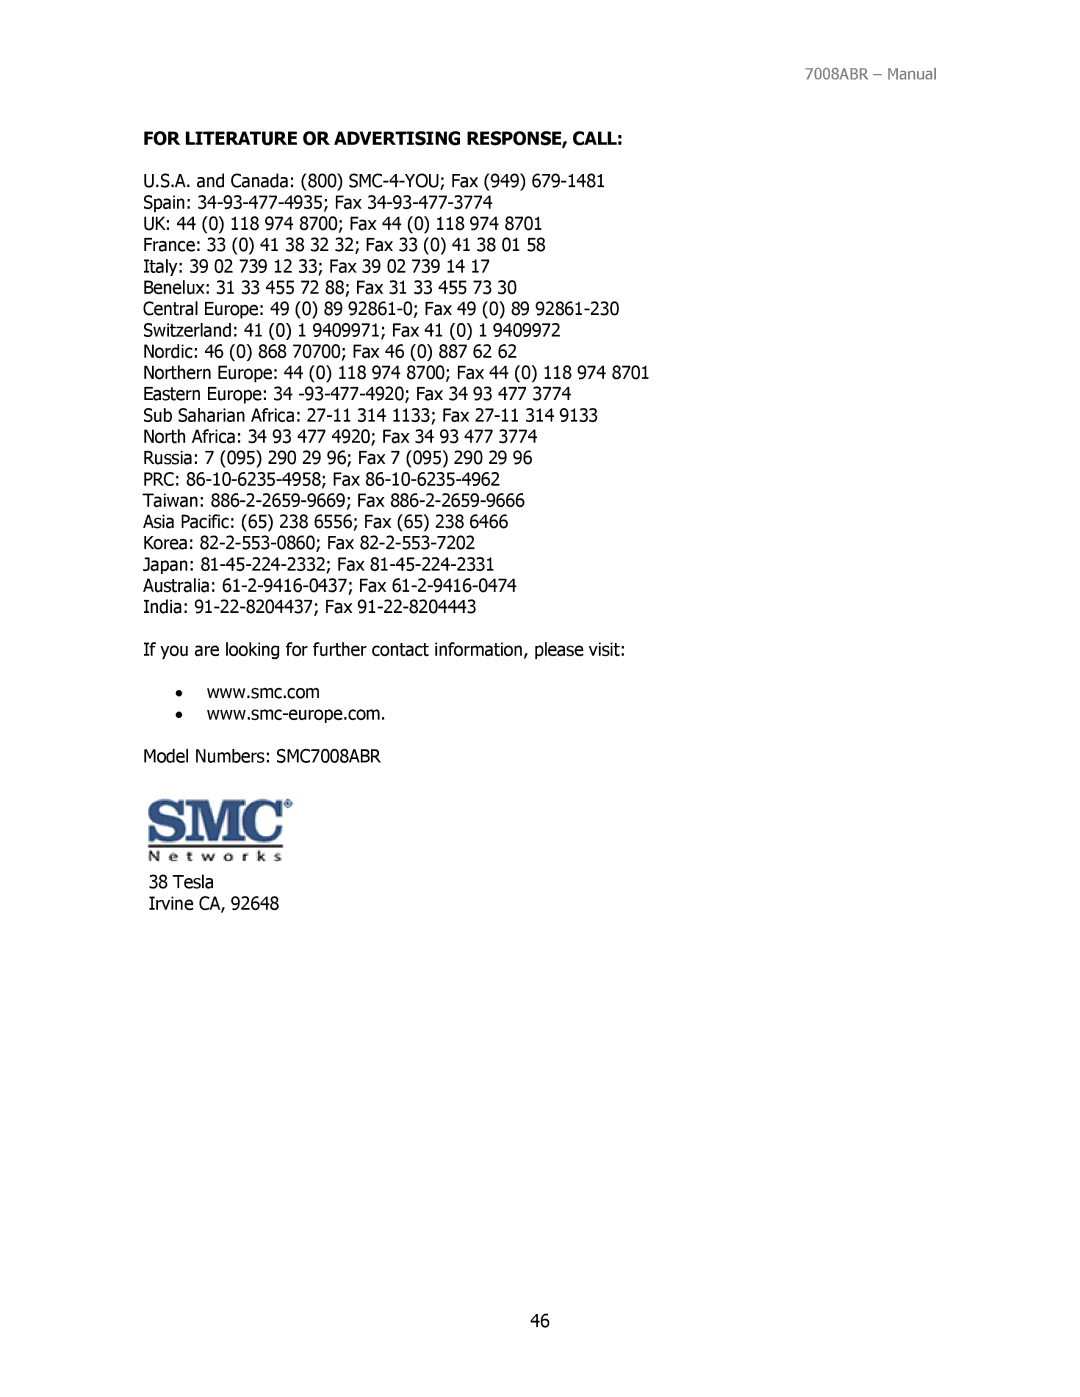 SMC Networks SMC7008ABR manual For Literature or Advertising RESPONSE, Call 